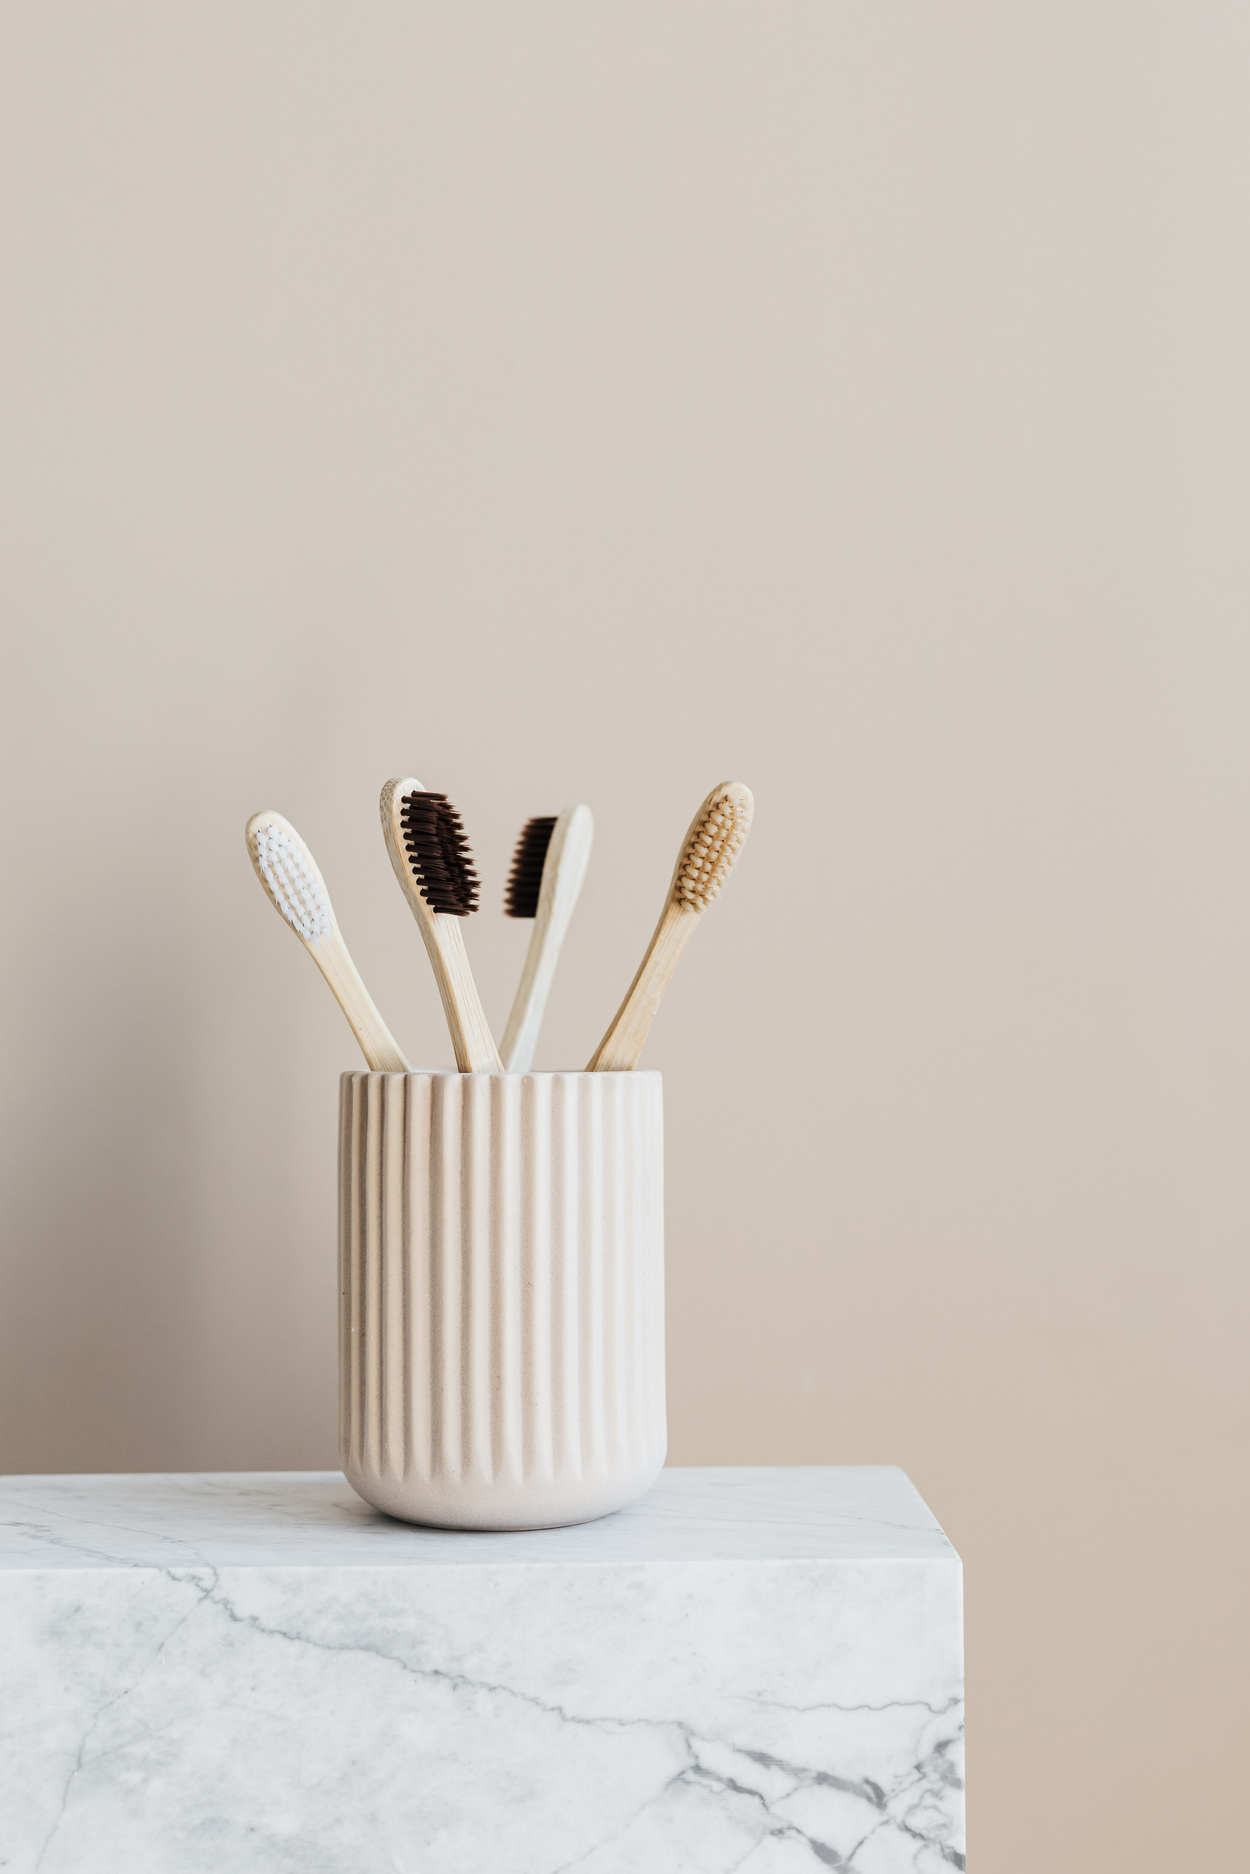 Set of natural wooden toothbrushes in white holder